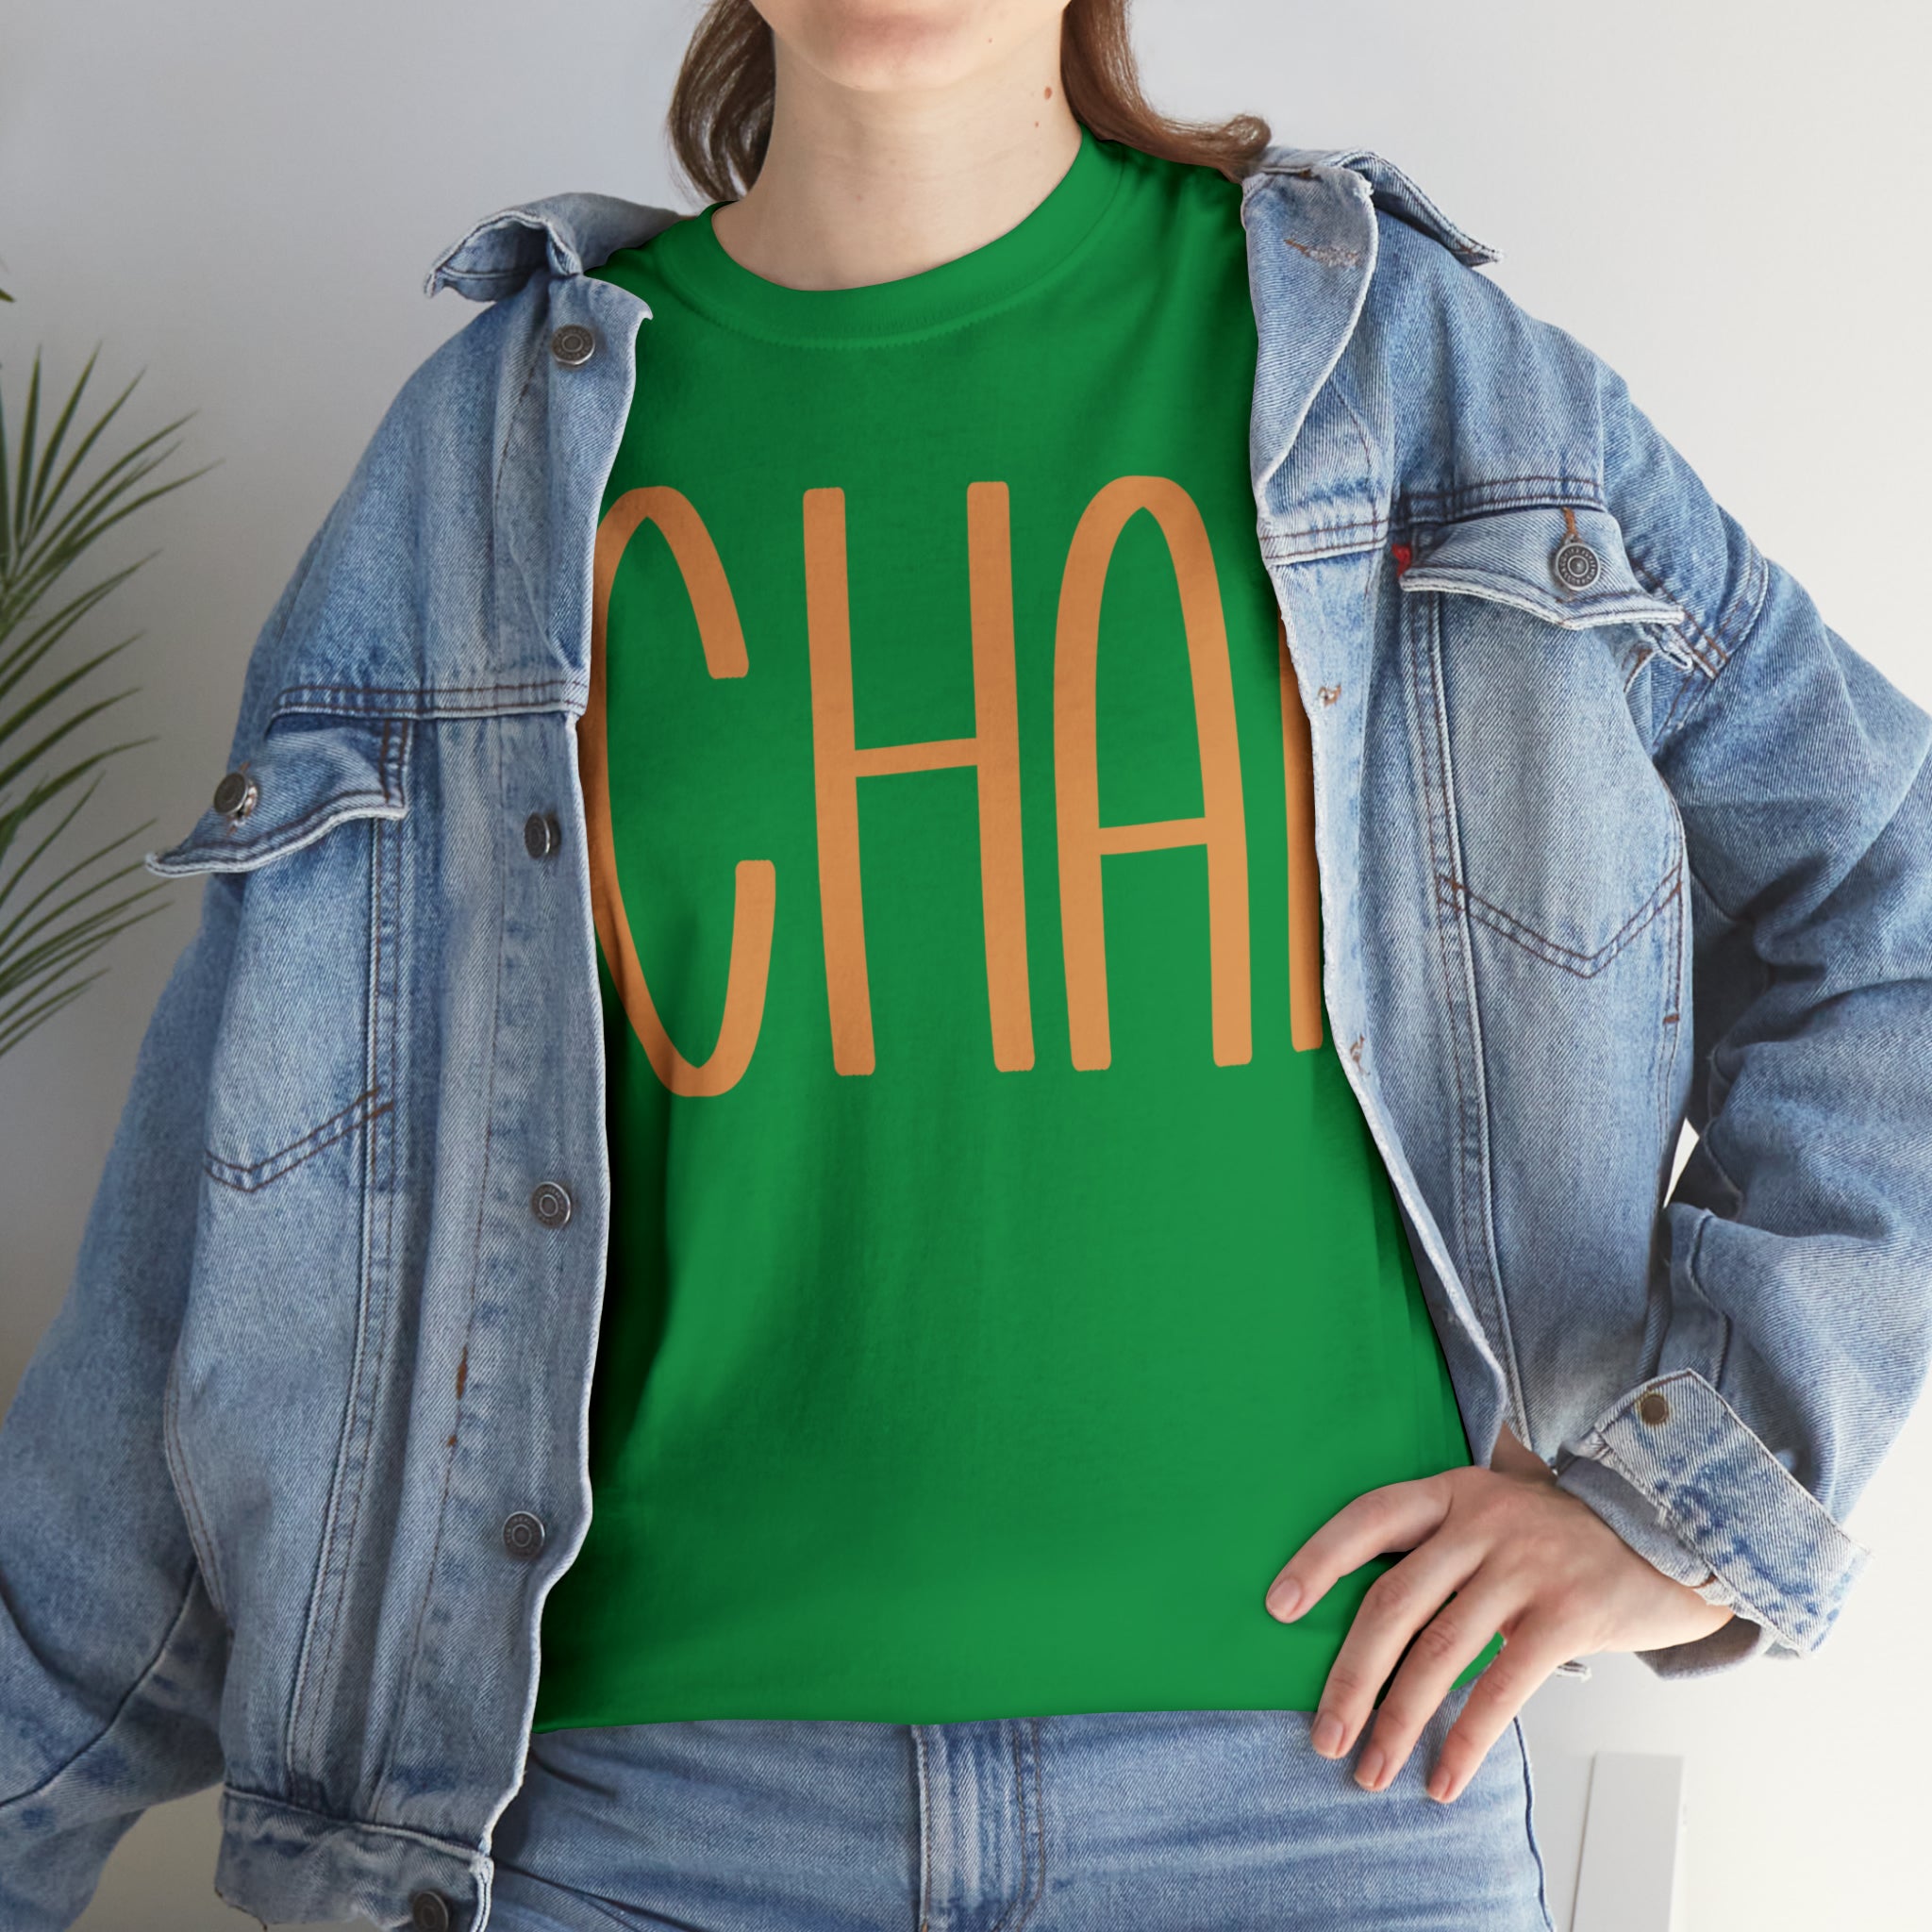 You Had Me At Chai T-Shirt Designs by C&C